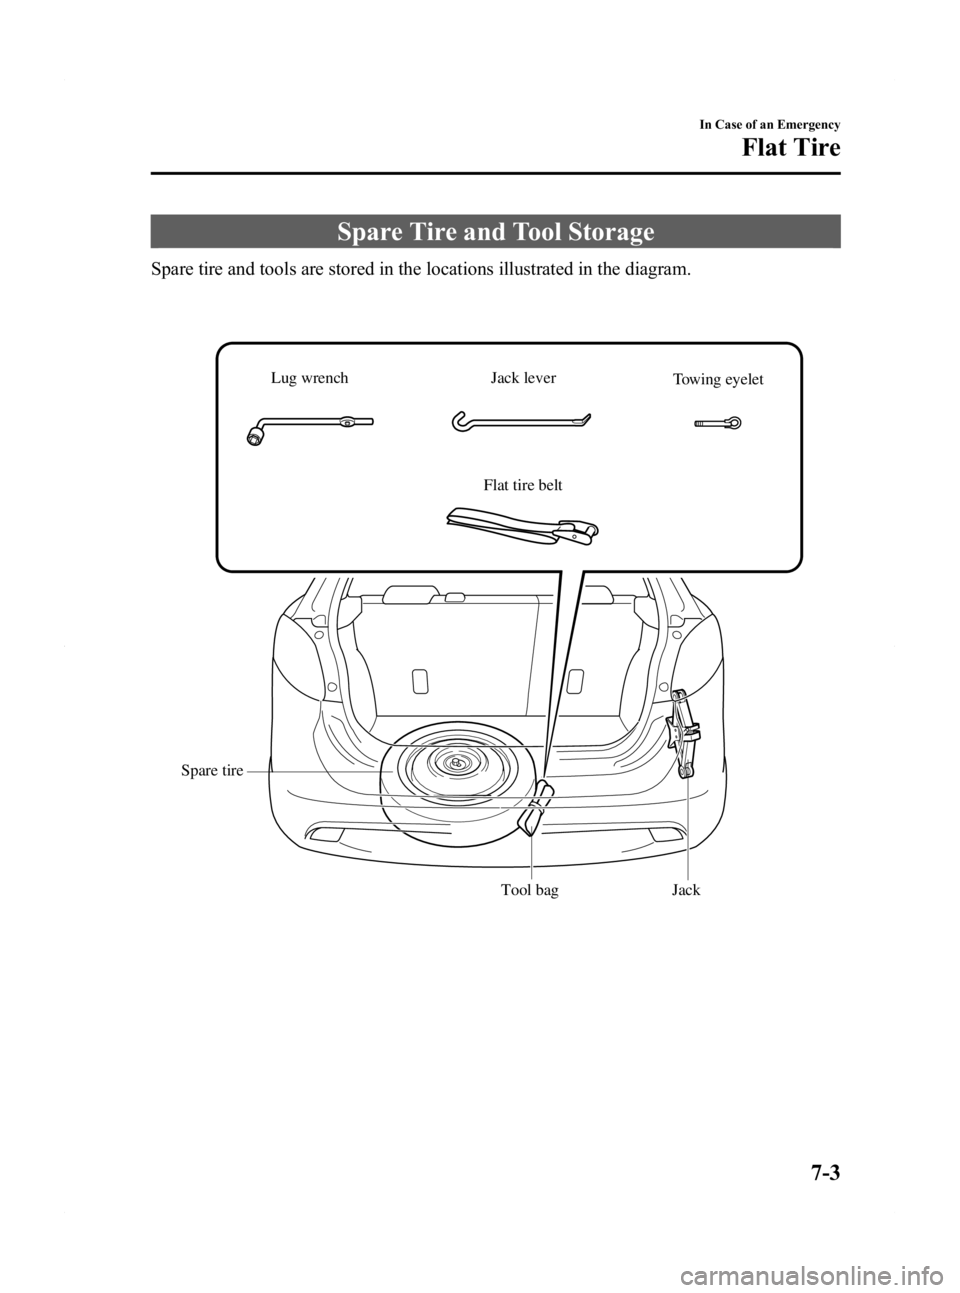 MAZDA MODEL 2 2011  Owners Manual Black plate (211,1)
Spare Tire and Tool Storage
Spare tire and tools are stored in the locations illustrated in the diagram.
Jack lever
Lug wrench
Jack
Tool bag
Spare tire Flat tire belt
Towing eyelet